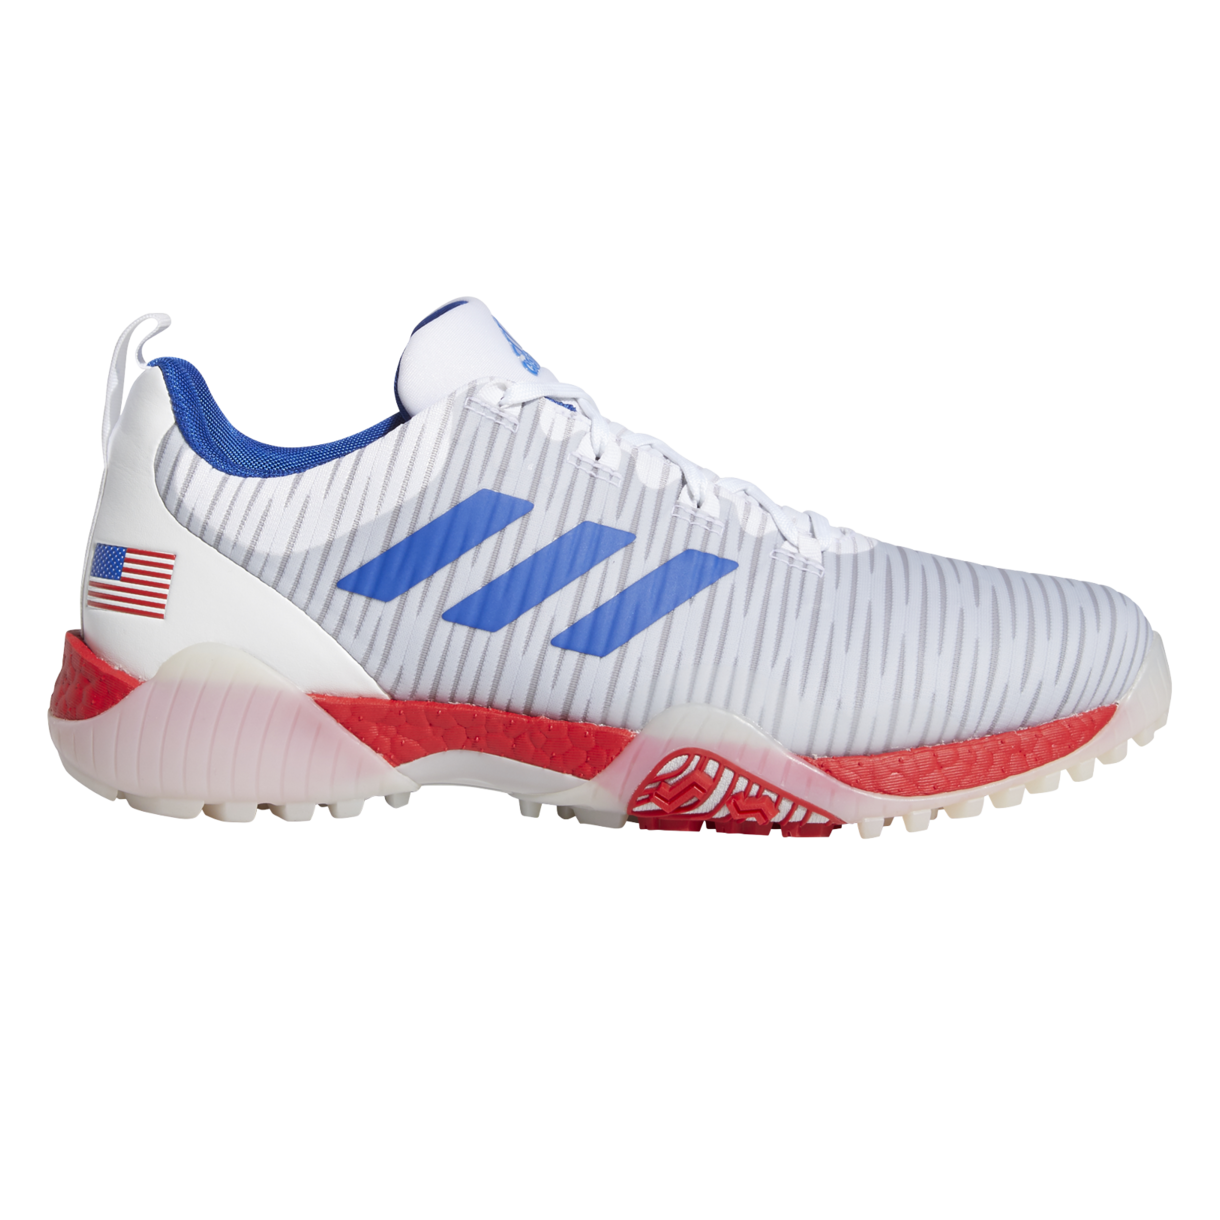 adidas golf shoes red white blue